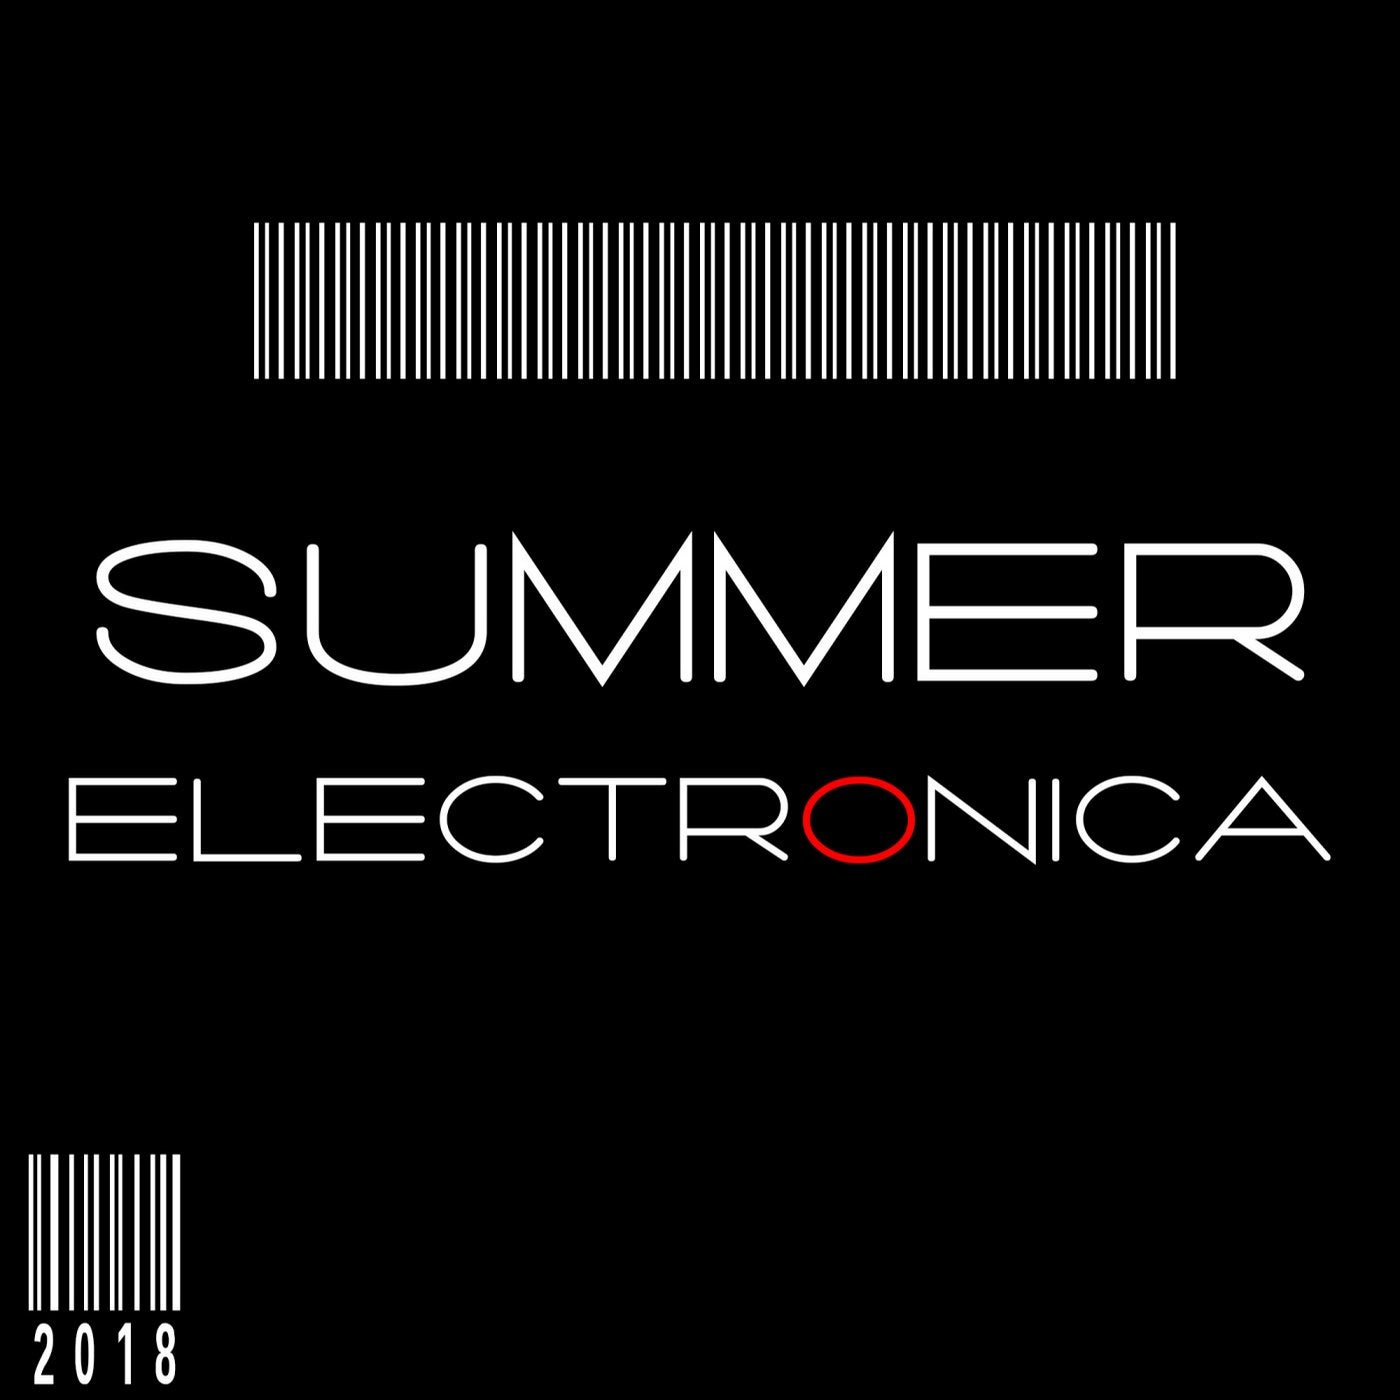 Summer Electronica 2018